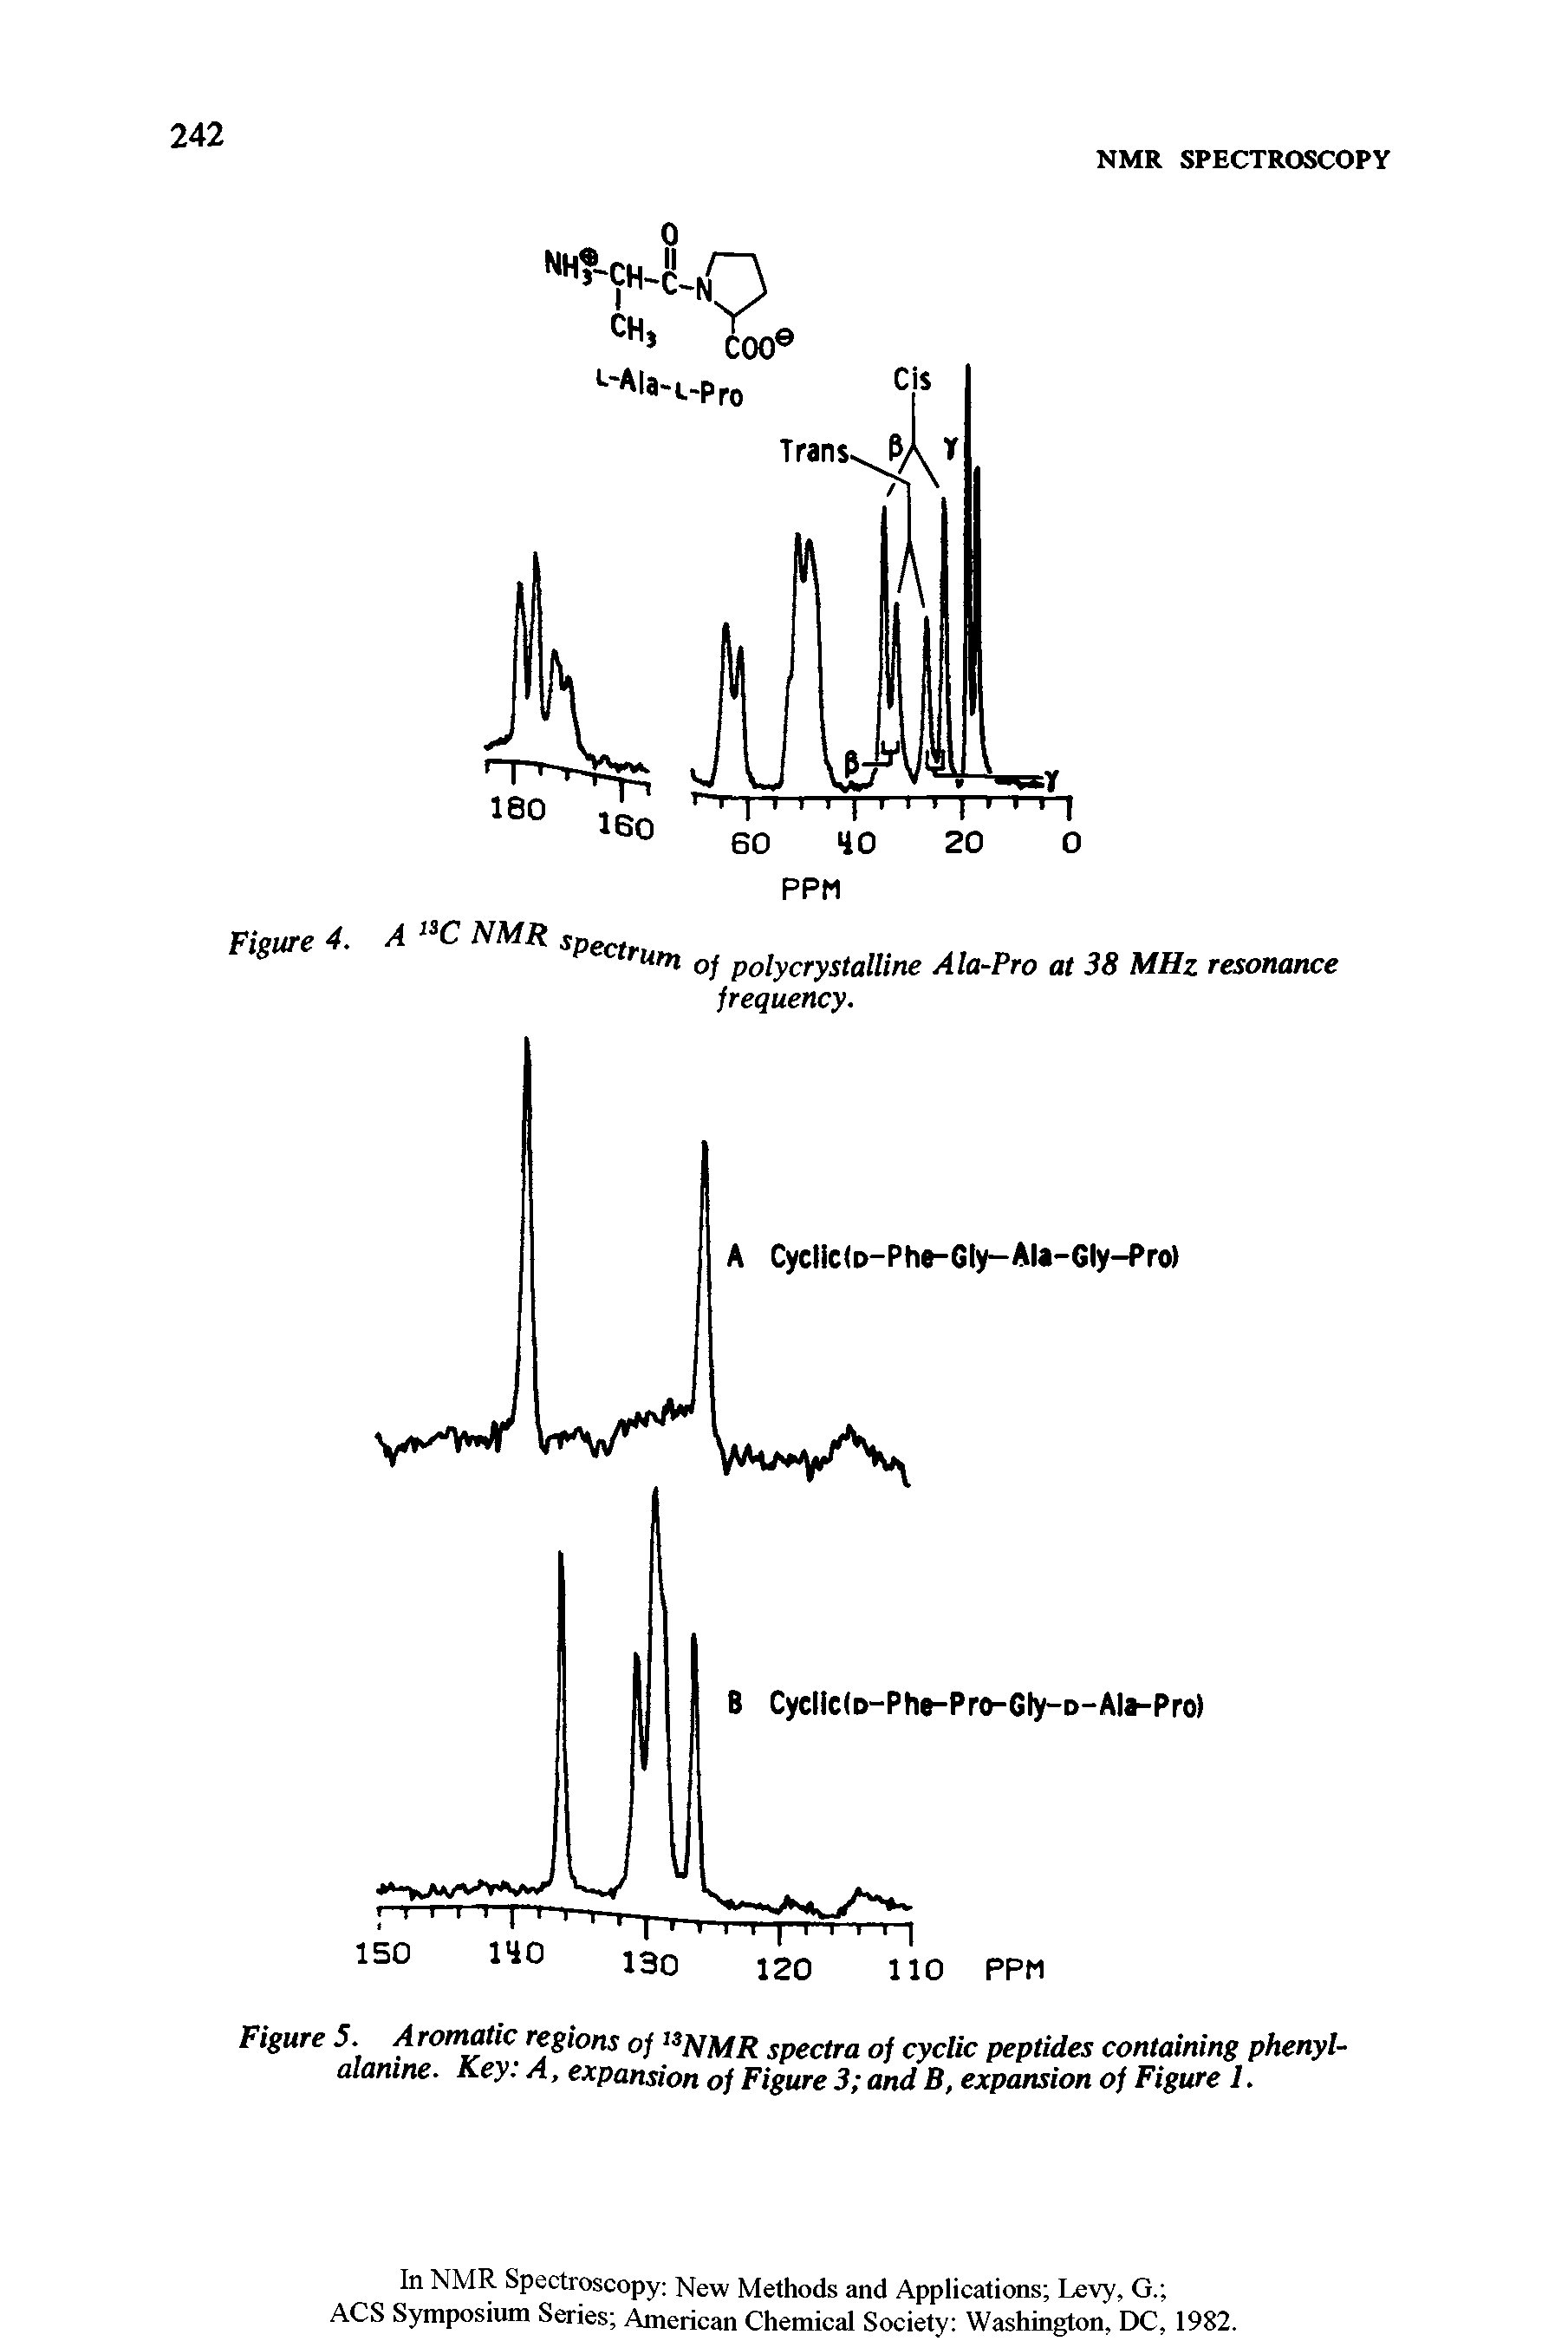 Figure 5. Aromatic regions of >NMR spectra of cyclic peptides containing phenylalanine. K.ey. A, expansion of Figure 3 and B, expansion of Figure 1.